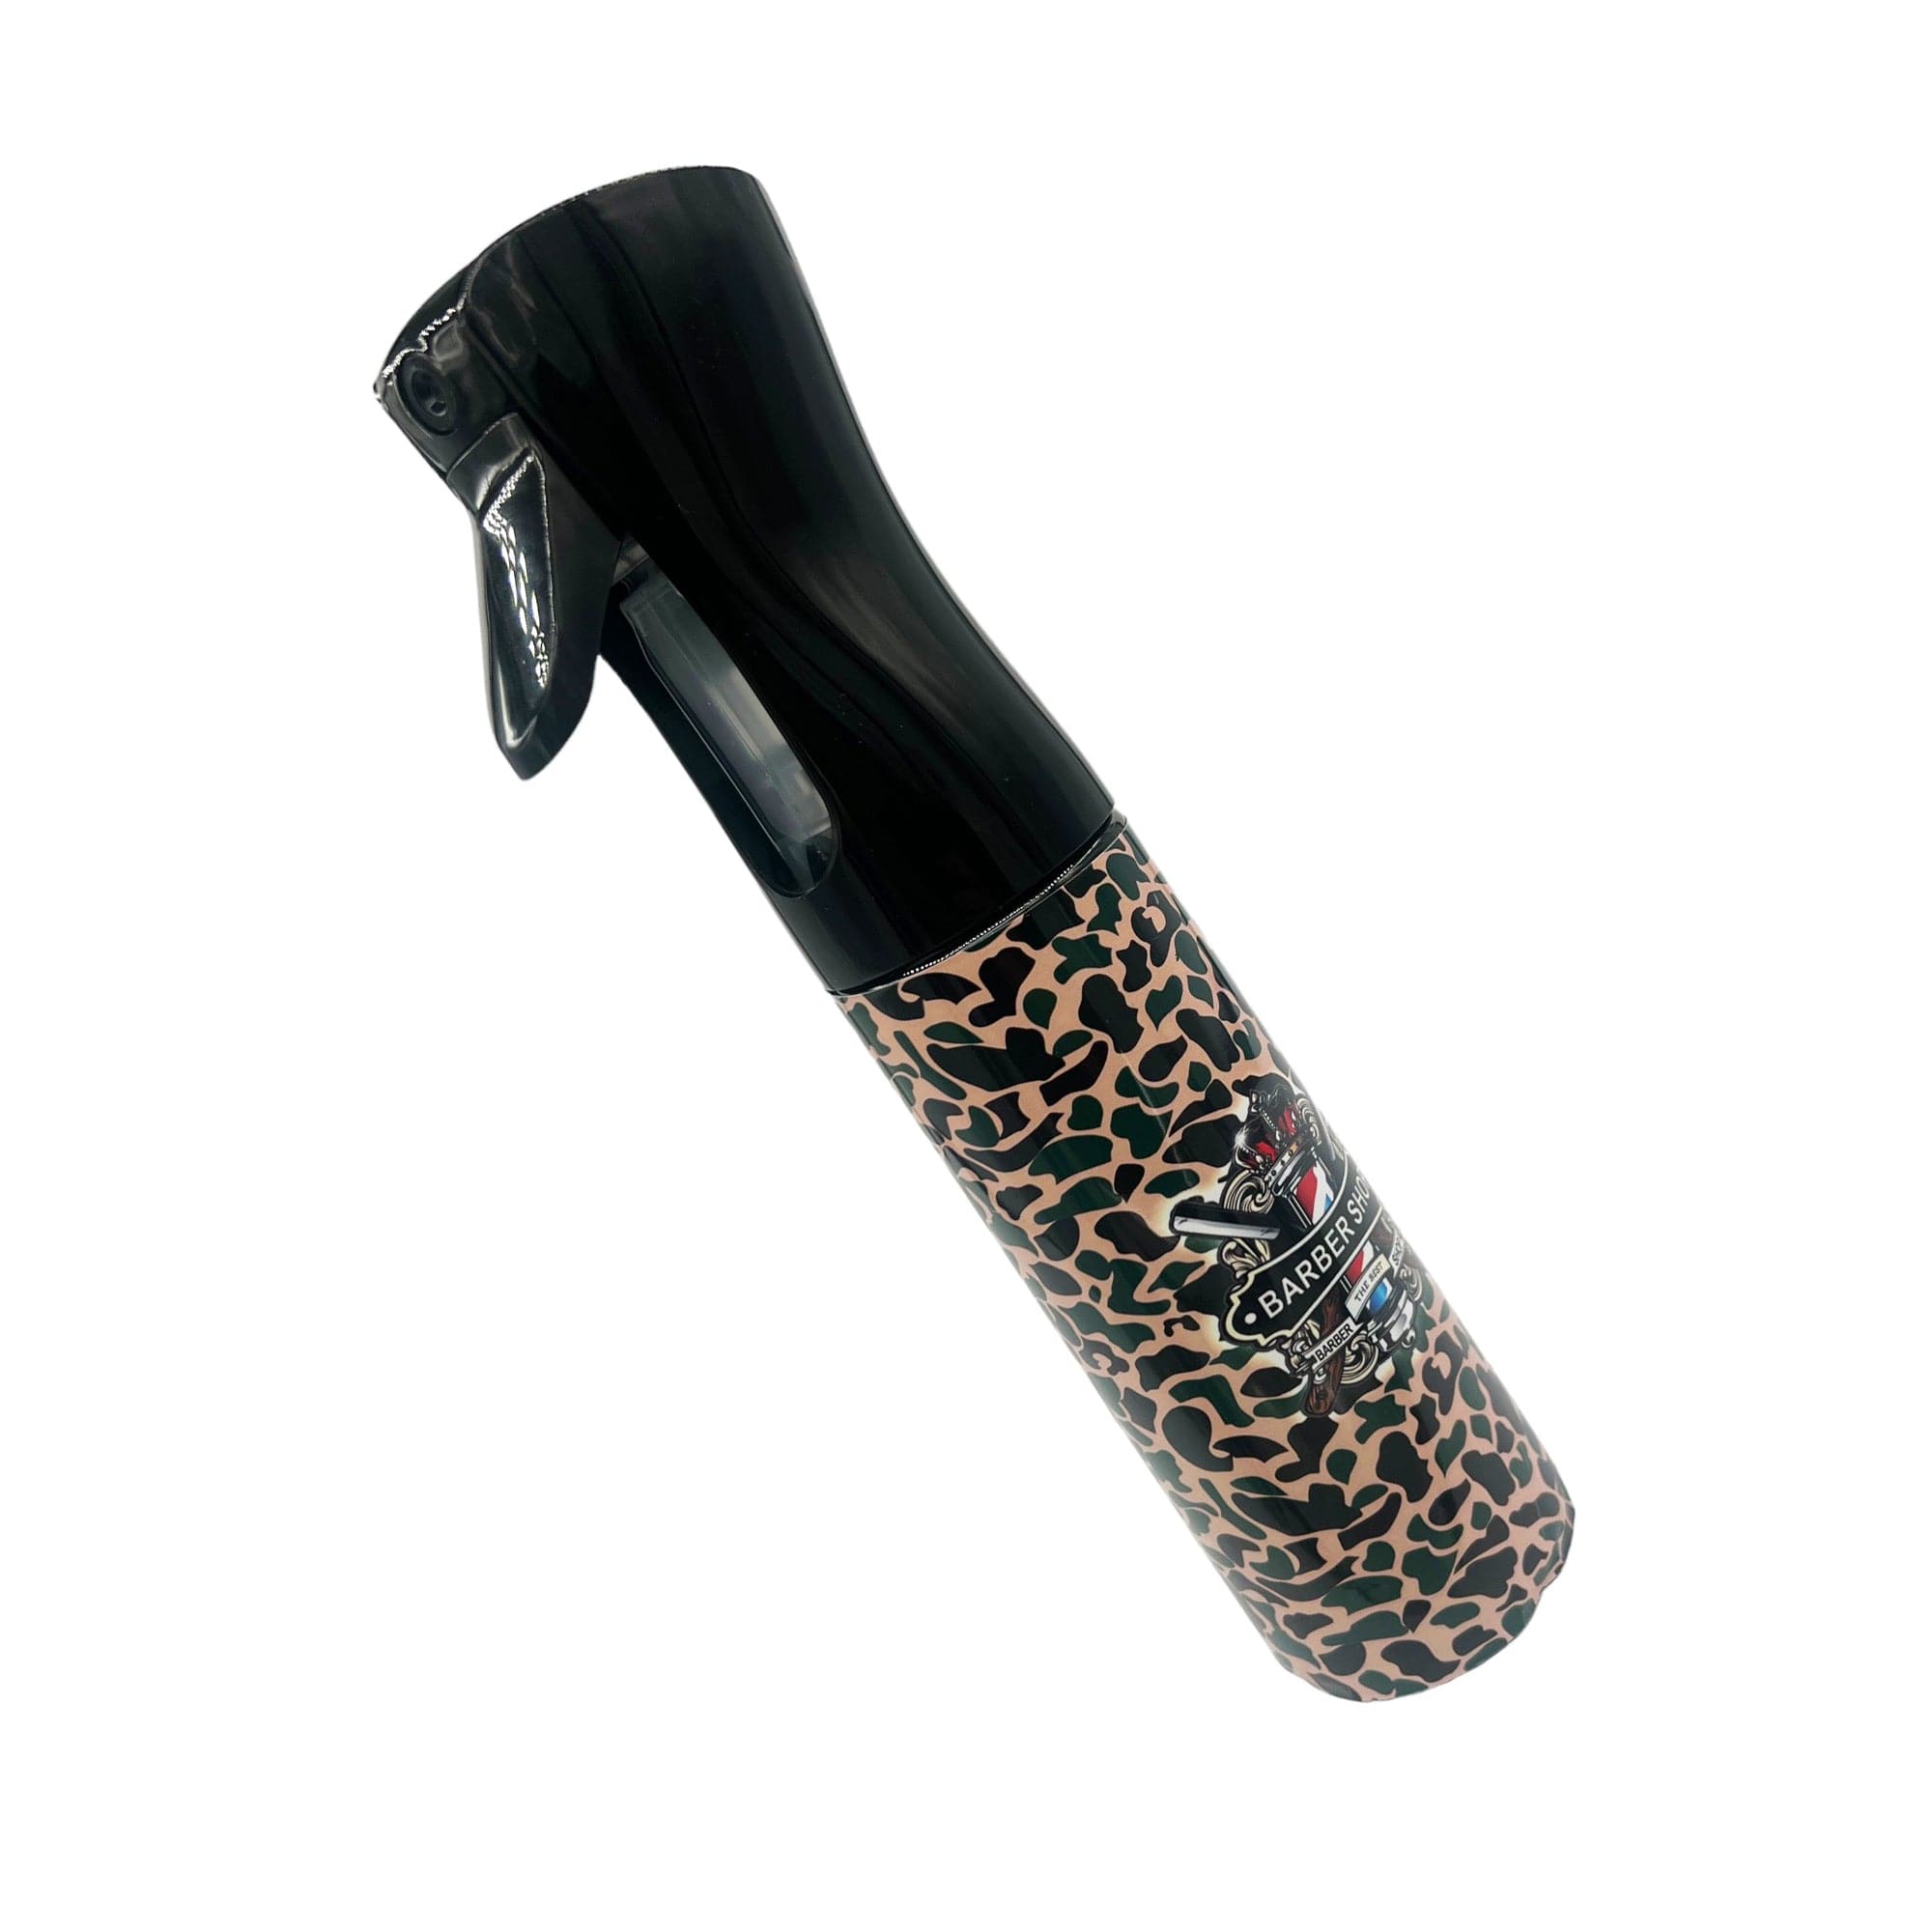 Eson - Water Spray Bottle 300ml Empty Refillable Continuous Water (Camouflage) - Eson Direct